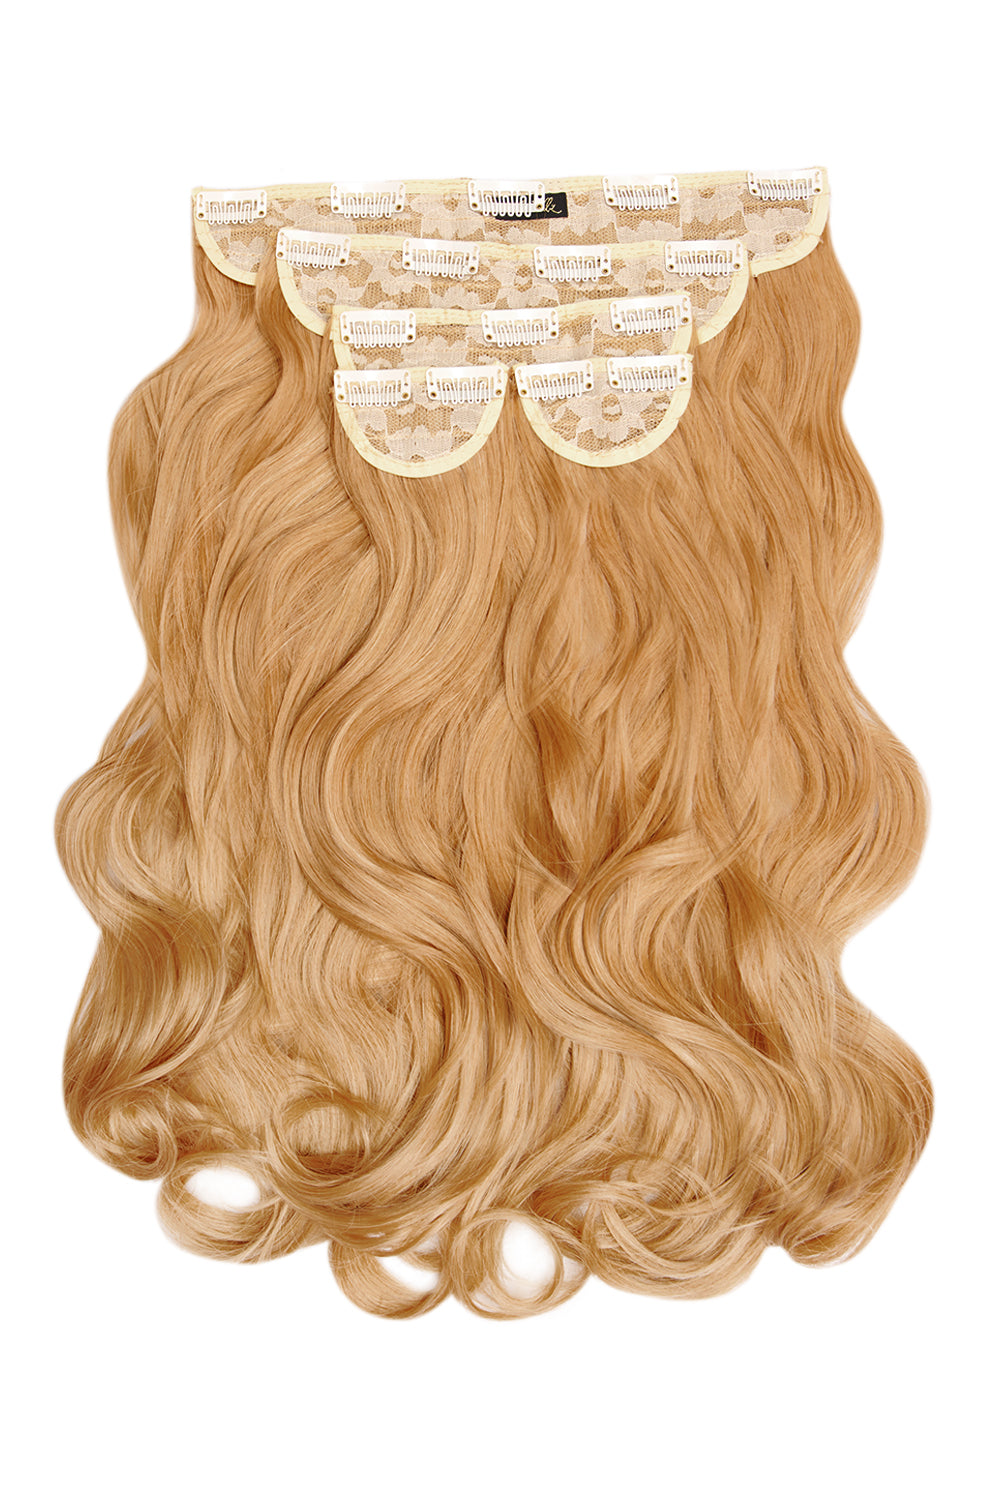 Super Thick 22" 5 Piece Natural Wavy Clip In Hair Extensions - LullaBellz - Caramel Blonde